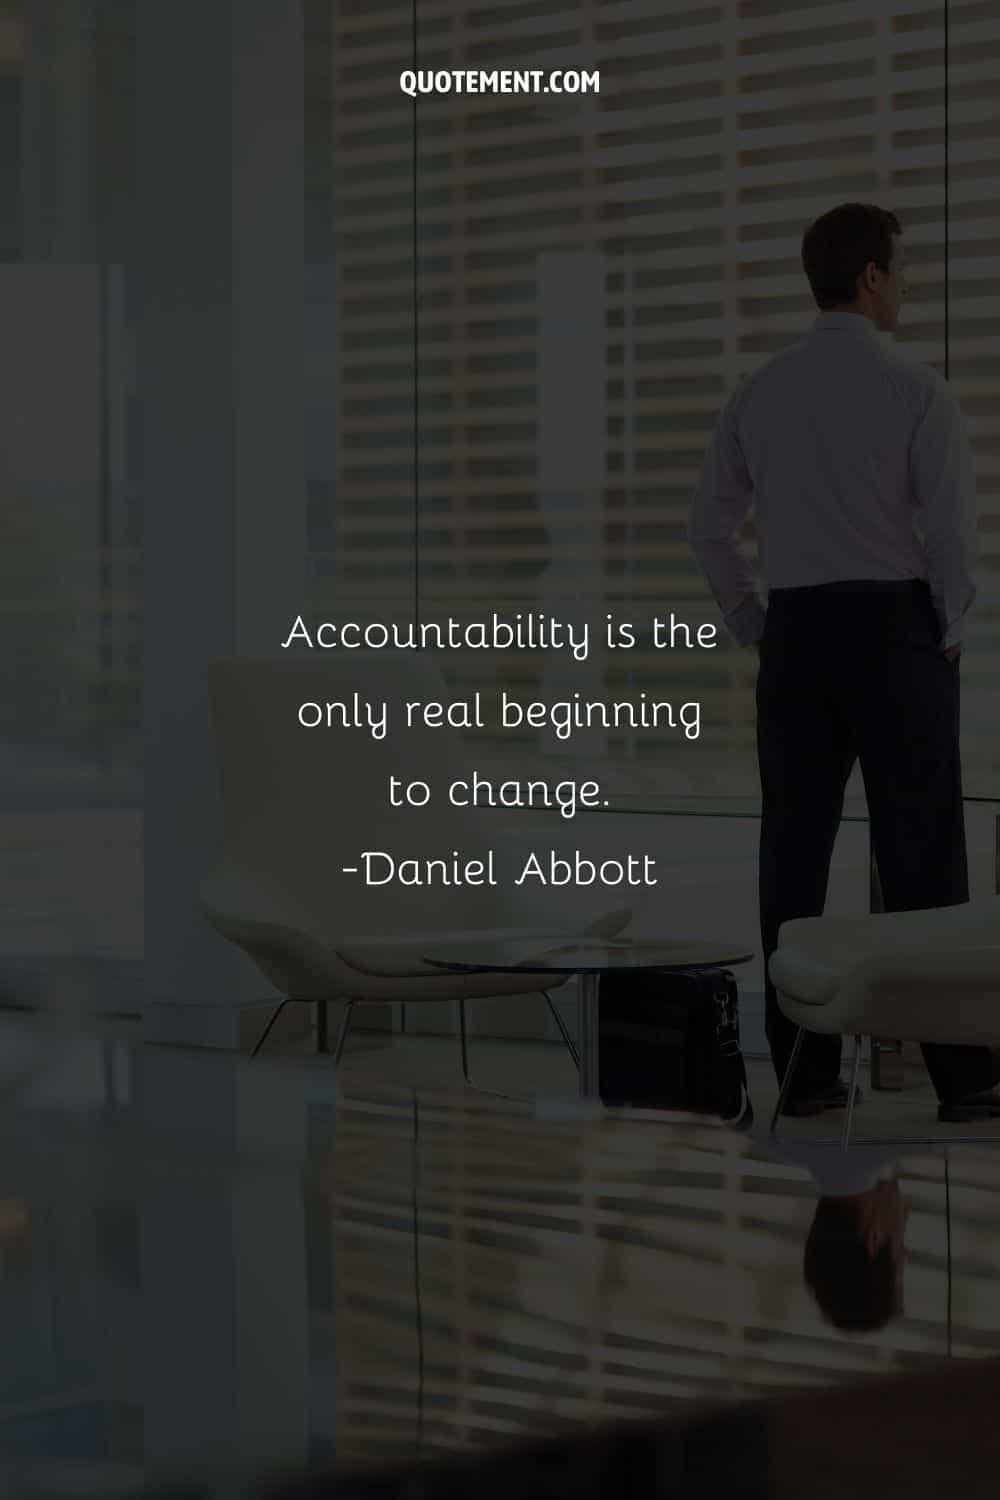 Accountability is the only real beginning to change